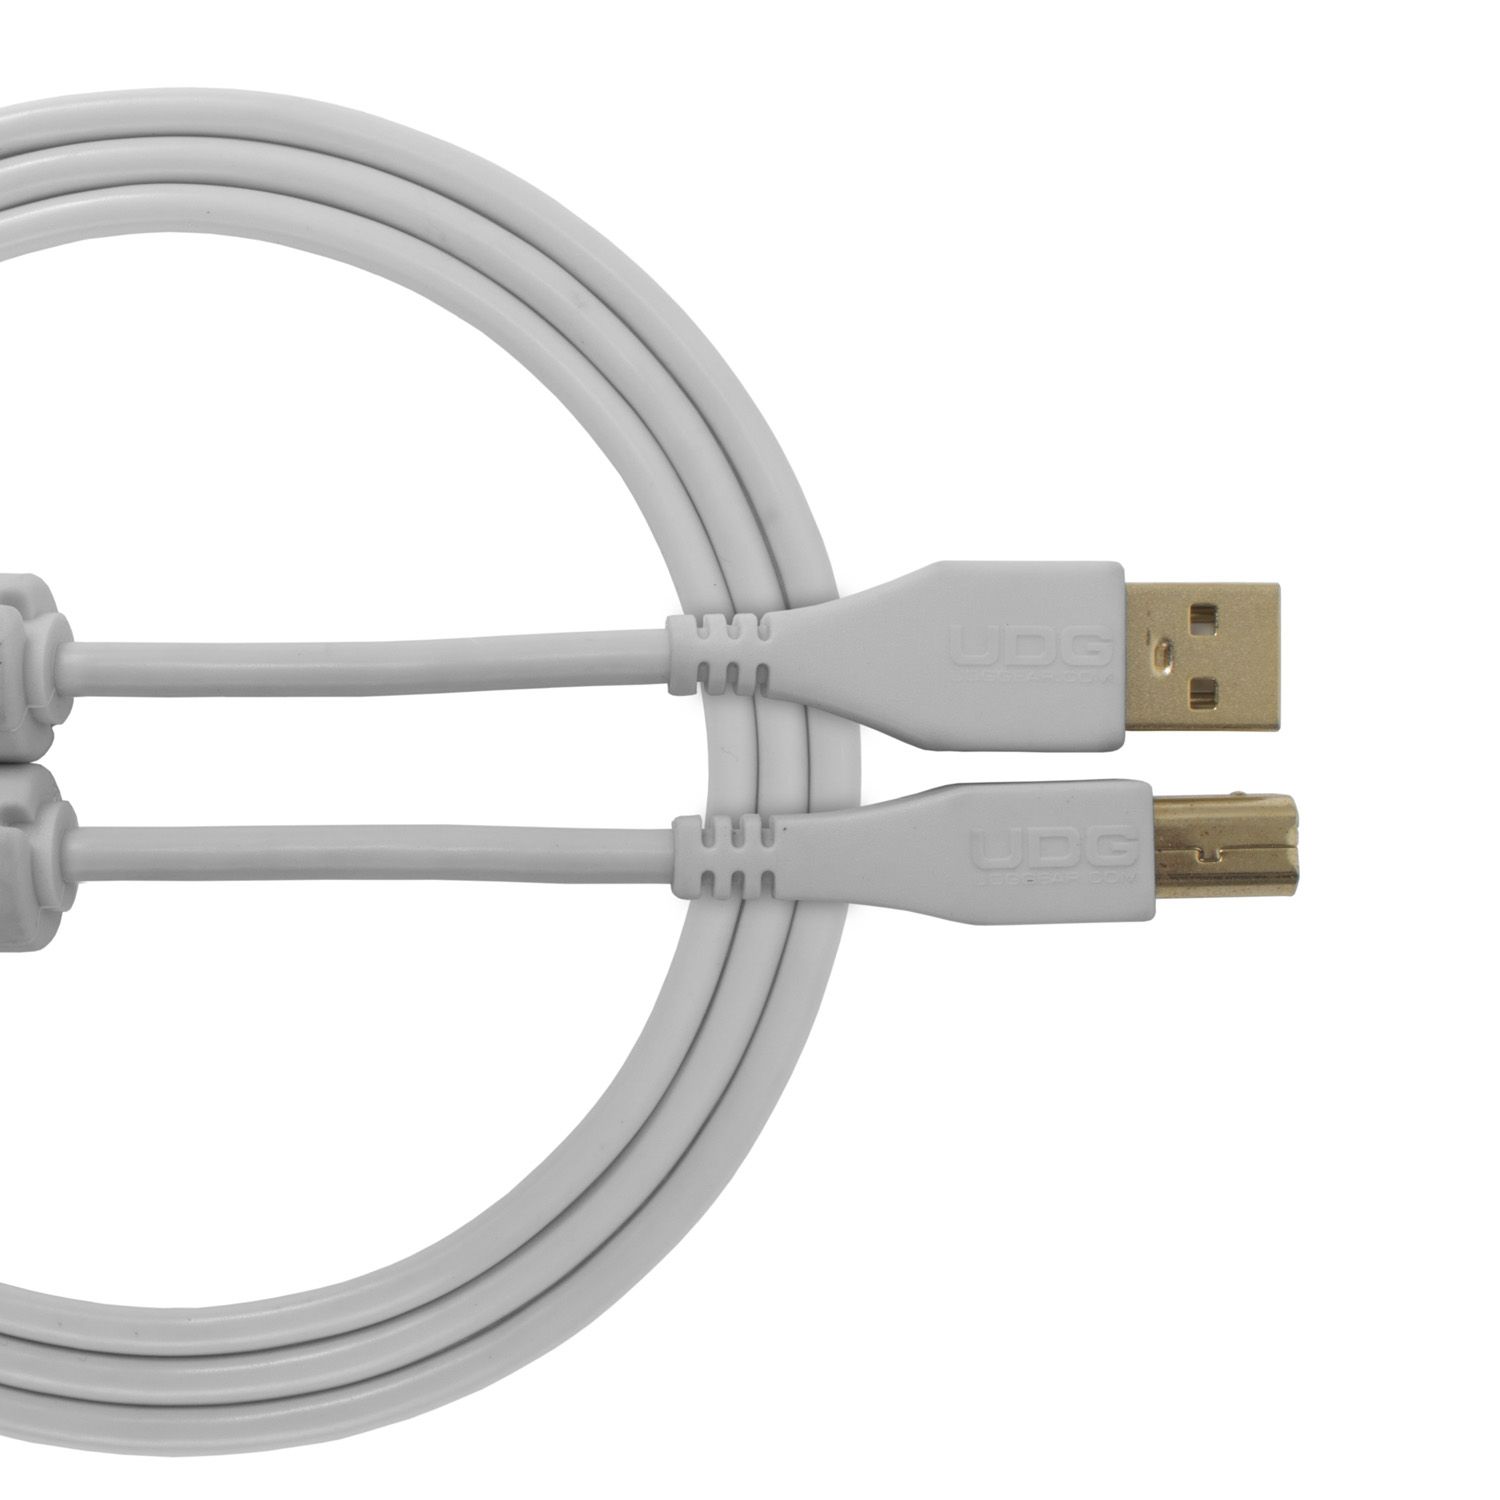 U95001WH UDG AUDIO CABLE USB 2.0 A-B WHITE STRA 1M